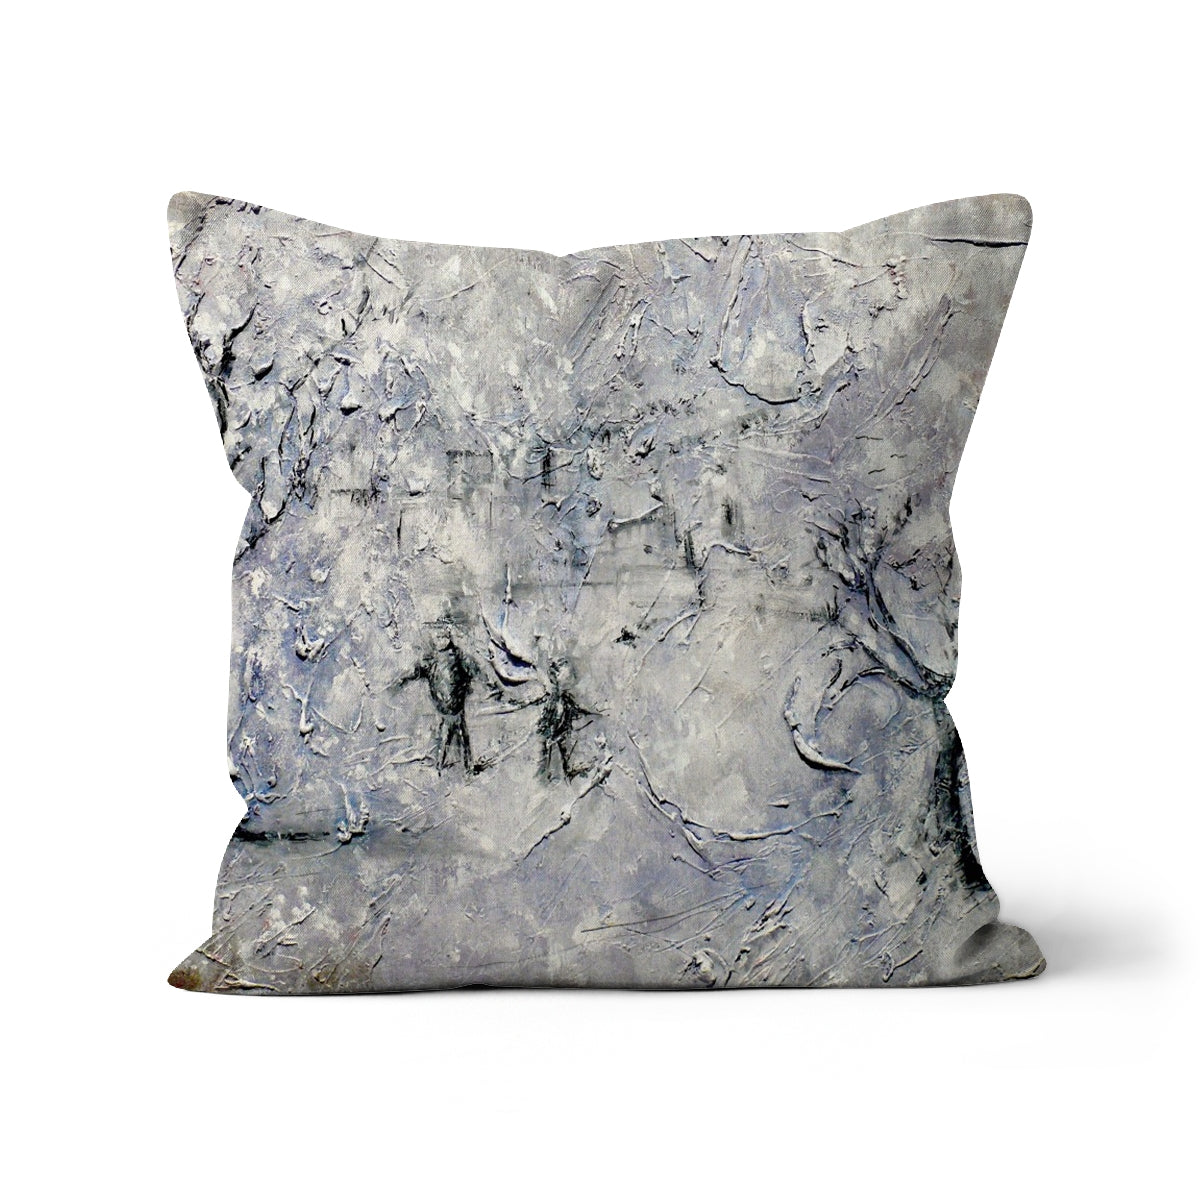 Father Daughter Snow Art Gifts Cushion-Cushions-Abstract & Impressionistic Art Gallery-Faux Suede-22"x22"-Paintings, Prints, Homeware, Art Gifts From Scotland By Scottish Artist Kevin Hunter